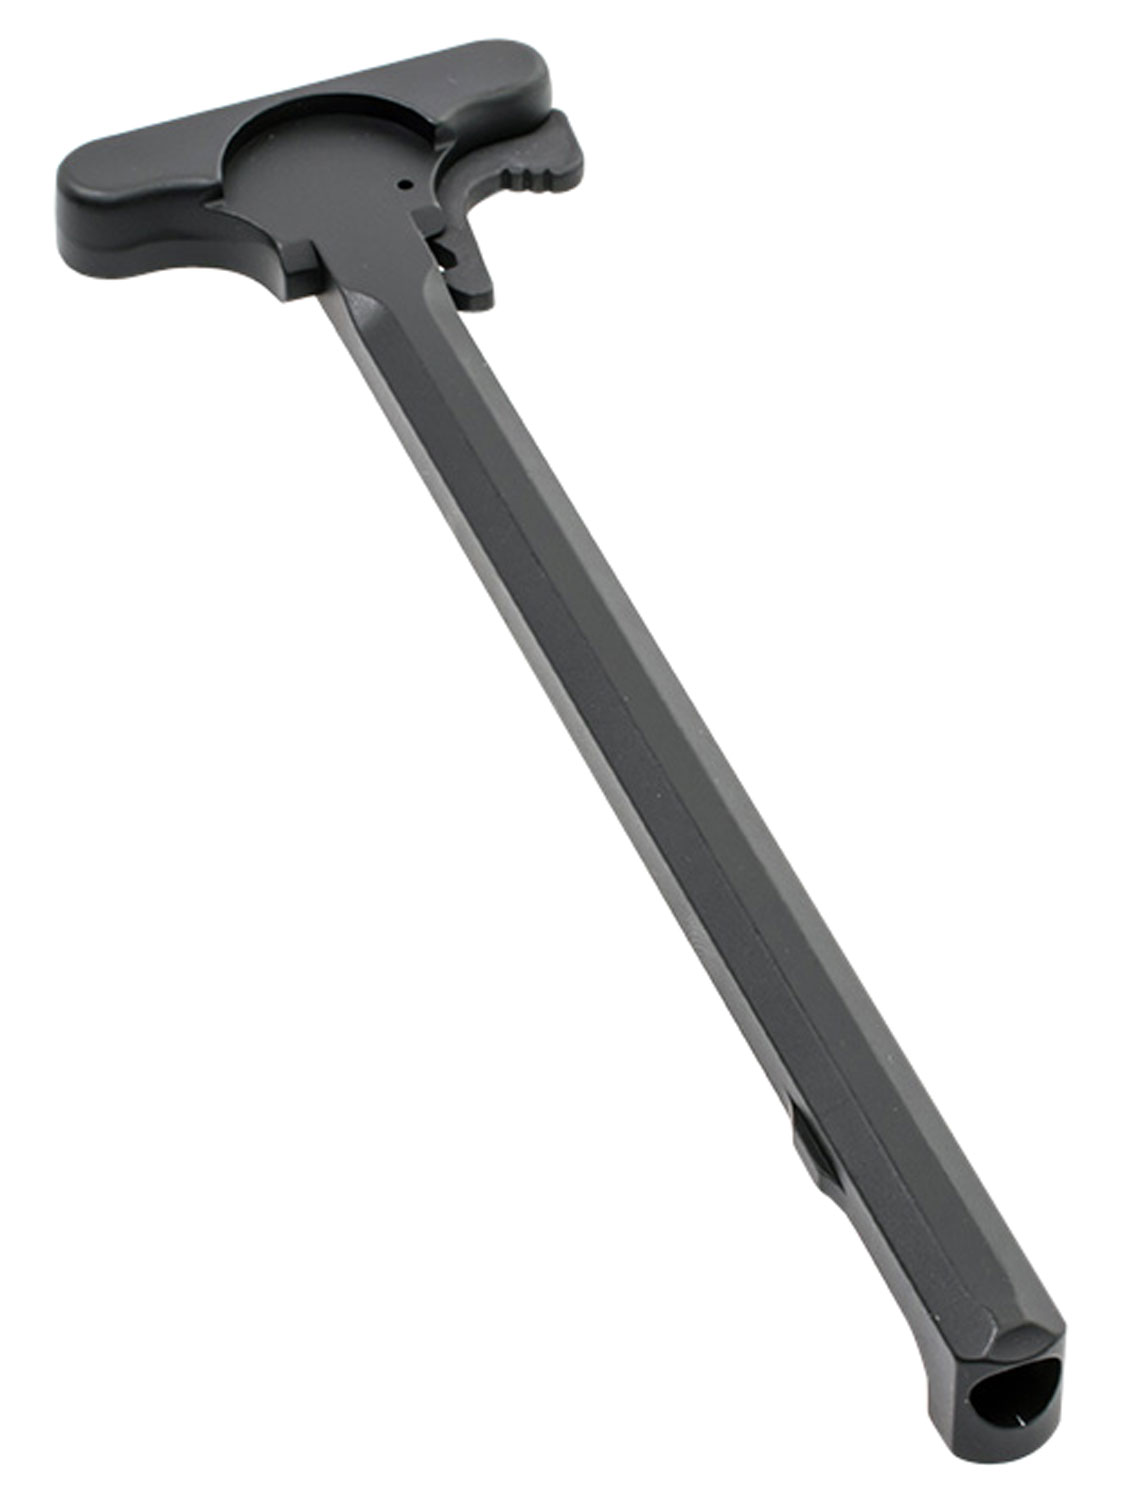 CMMG CHARGING HANDLE ASSEMBLY FOR AR-15 BLACK